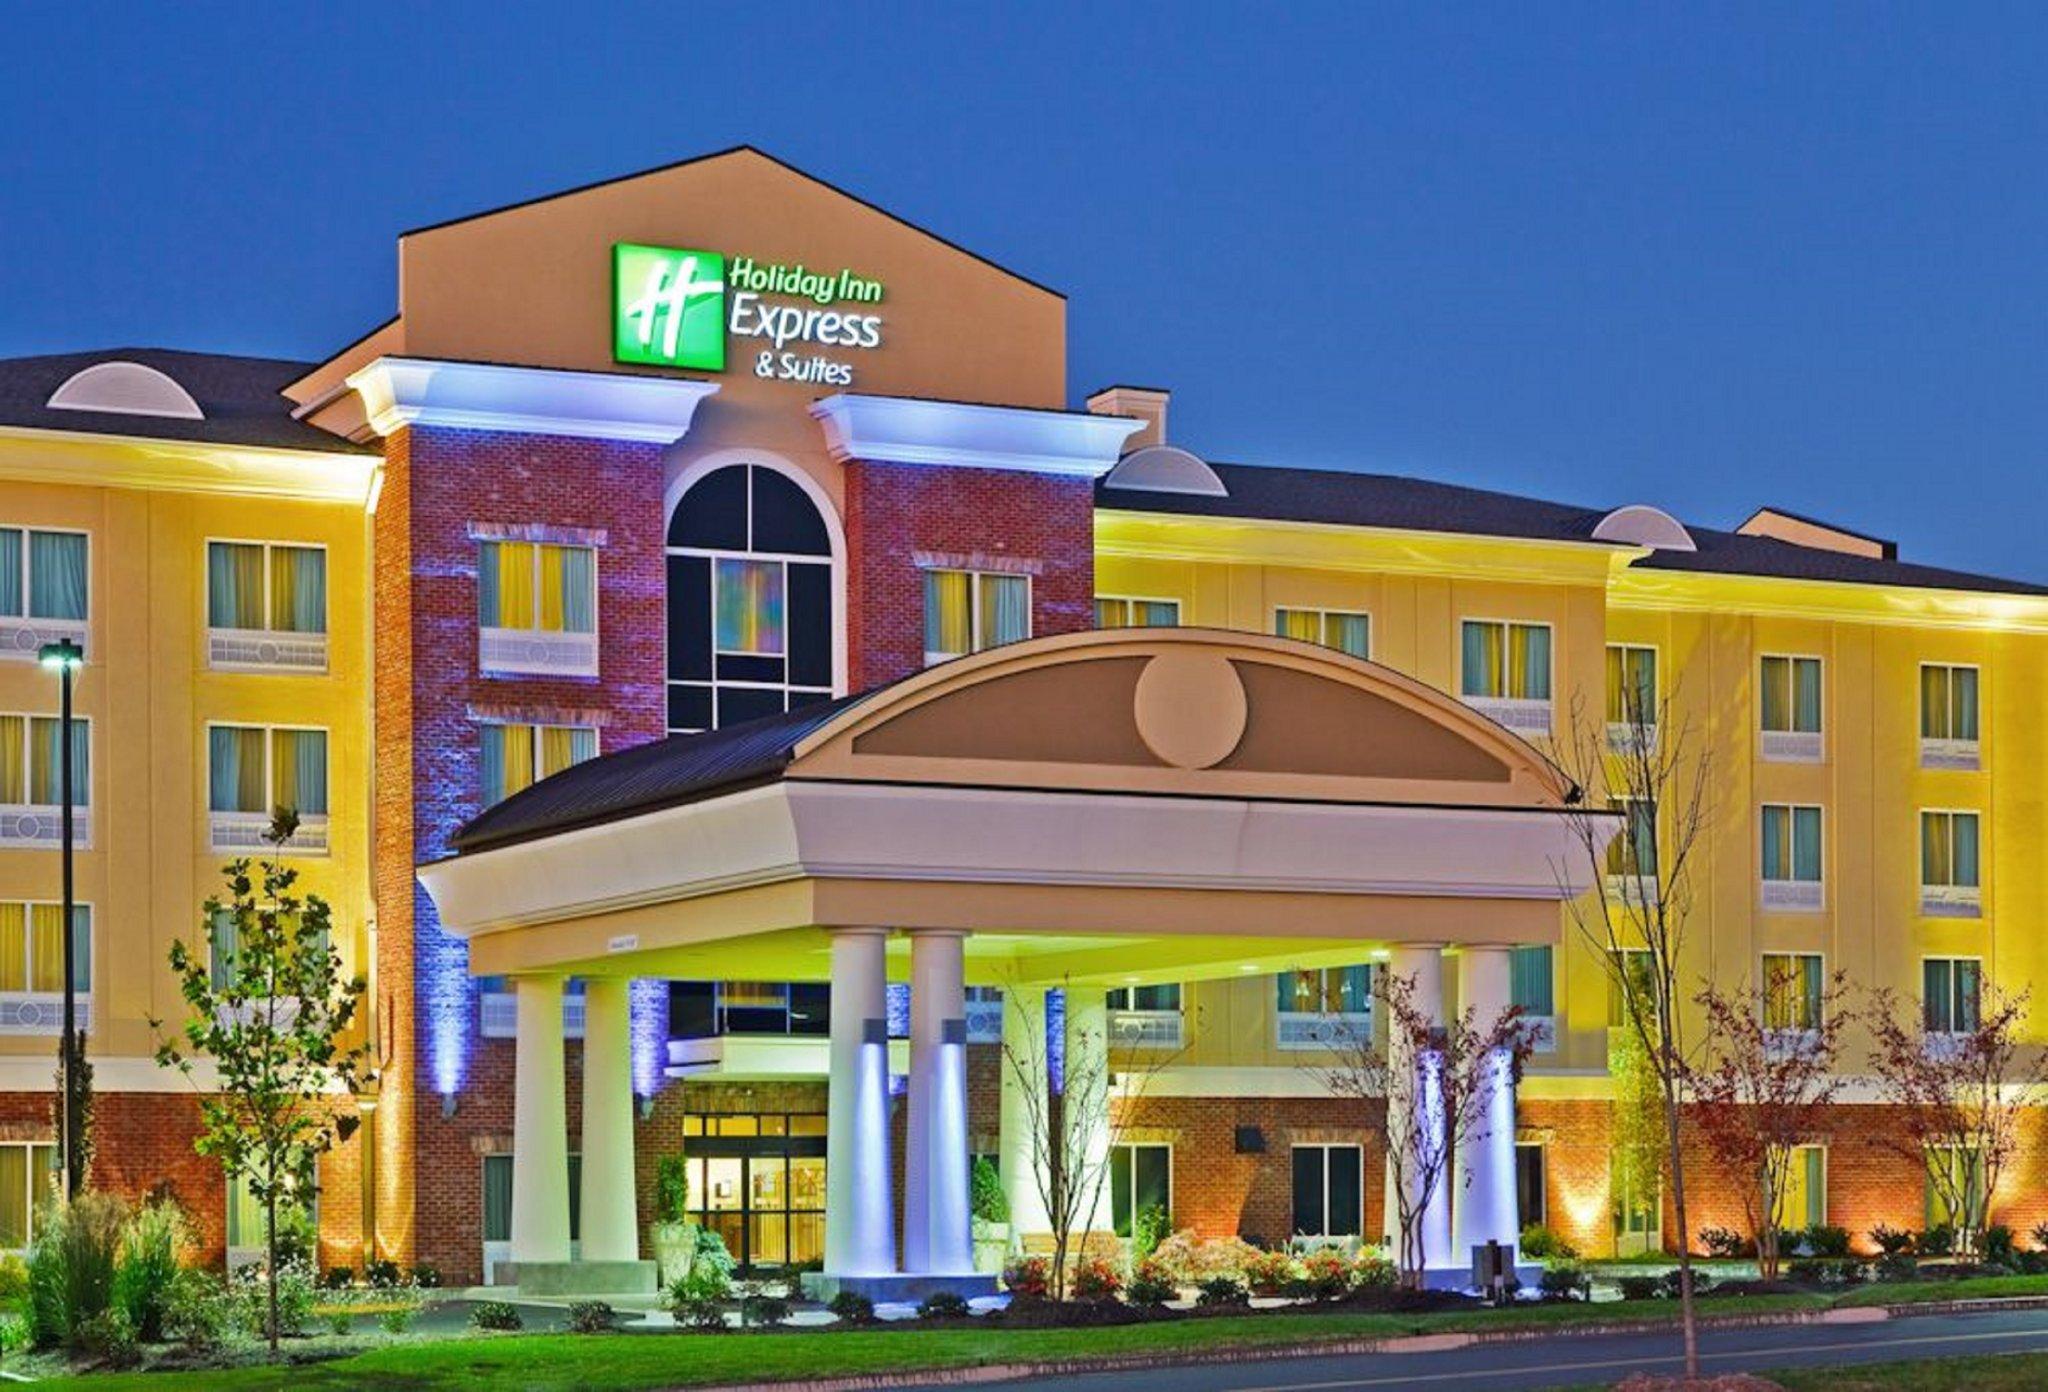 Holiday Inn Express Hotel & Suites Ooltewah Springs-Chattanooga in Chattanooga, TN